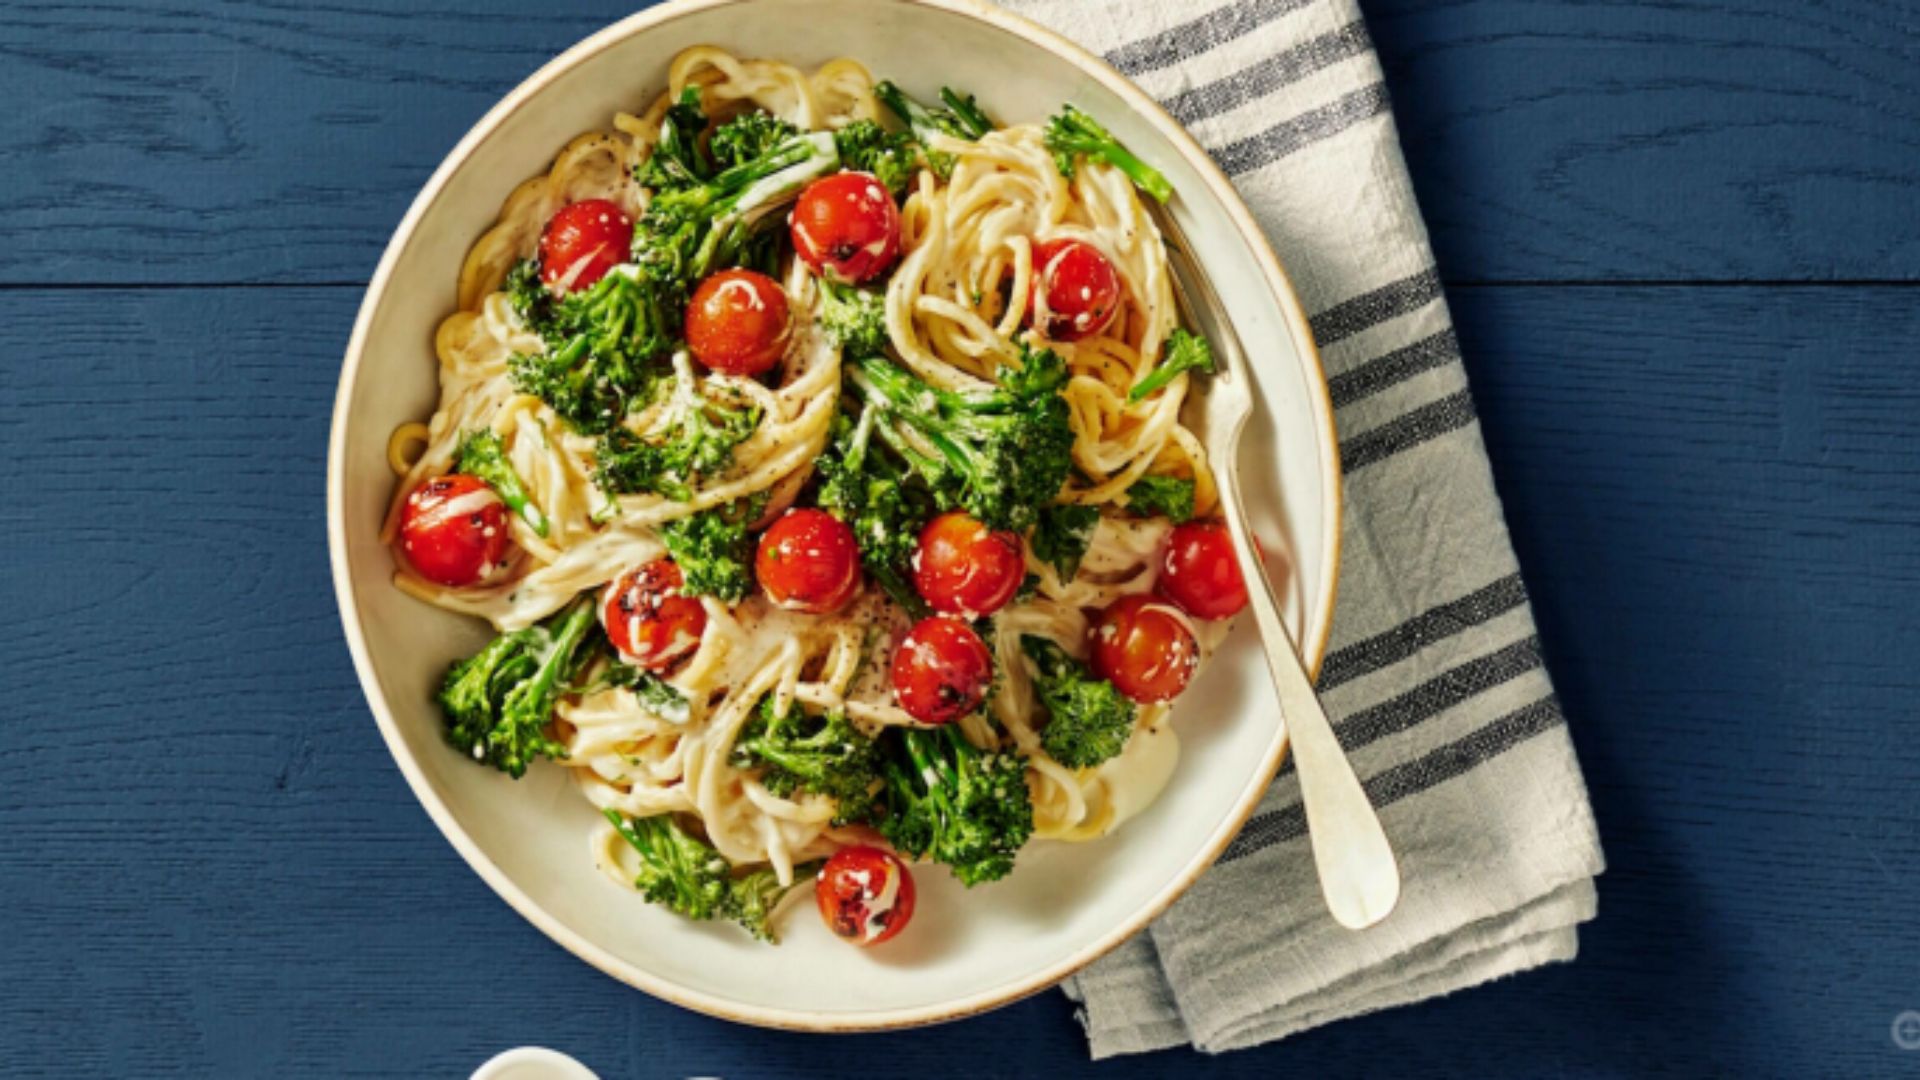 Braised creamy pasta with broccoli and cherry tomatoes (Credit Hellmann's)